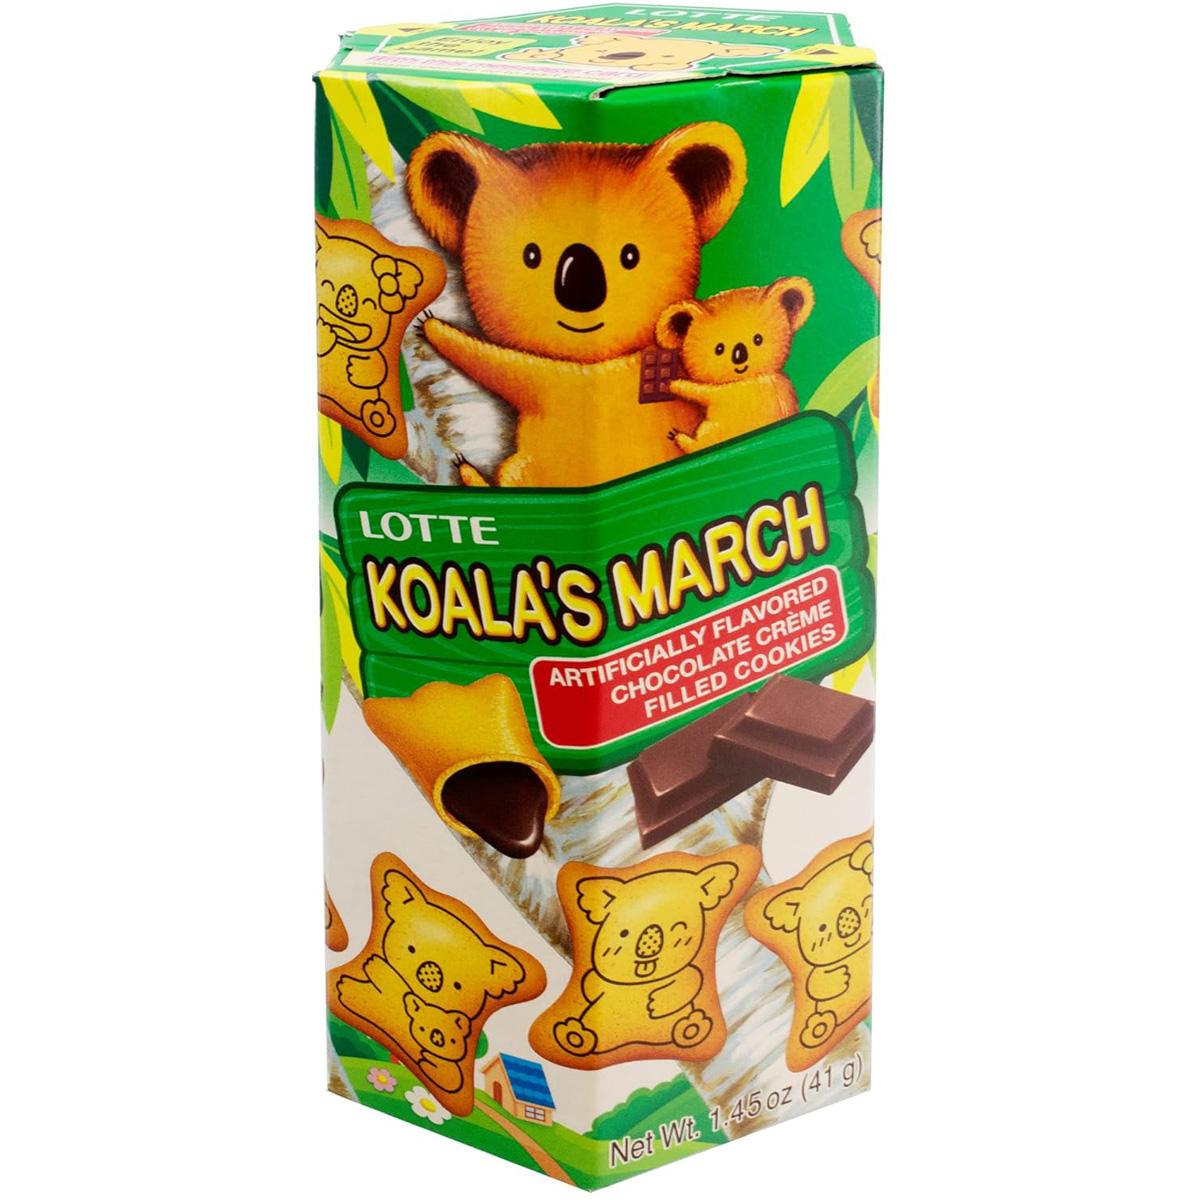 Lotte Koalas March Cookie with Chocolate Cream for $1.14 Shipped